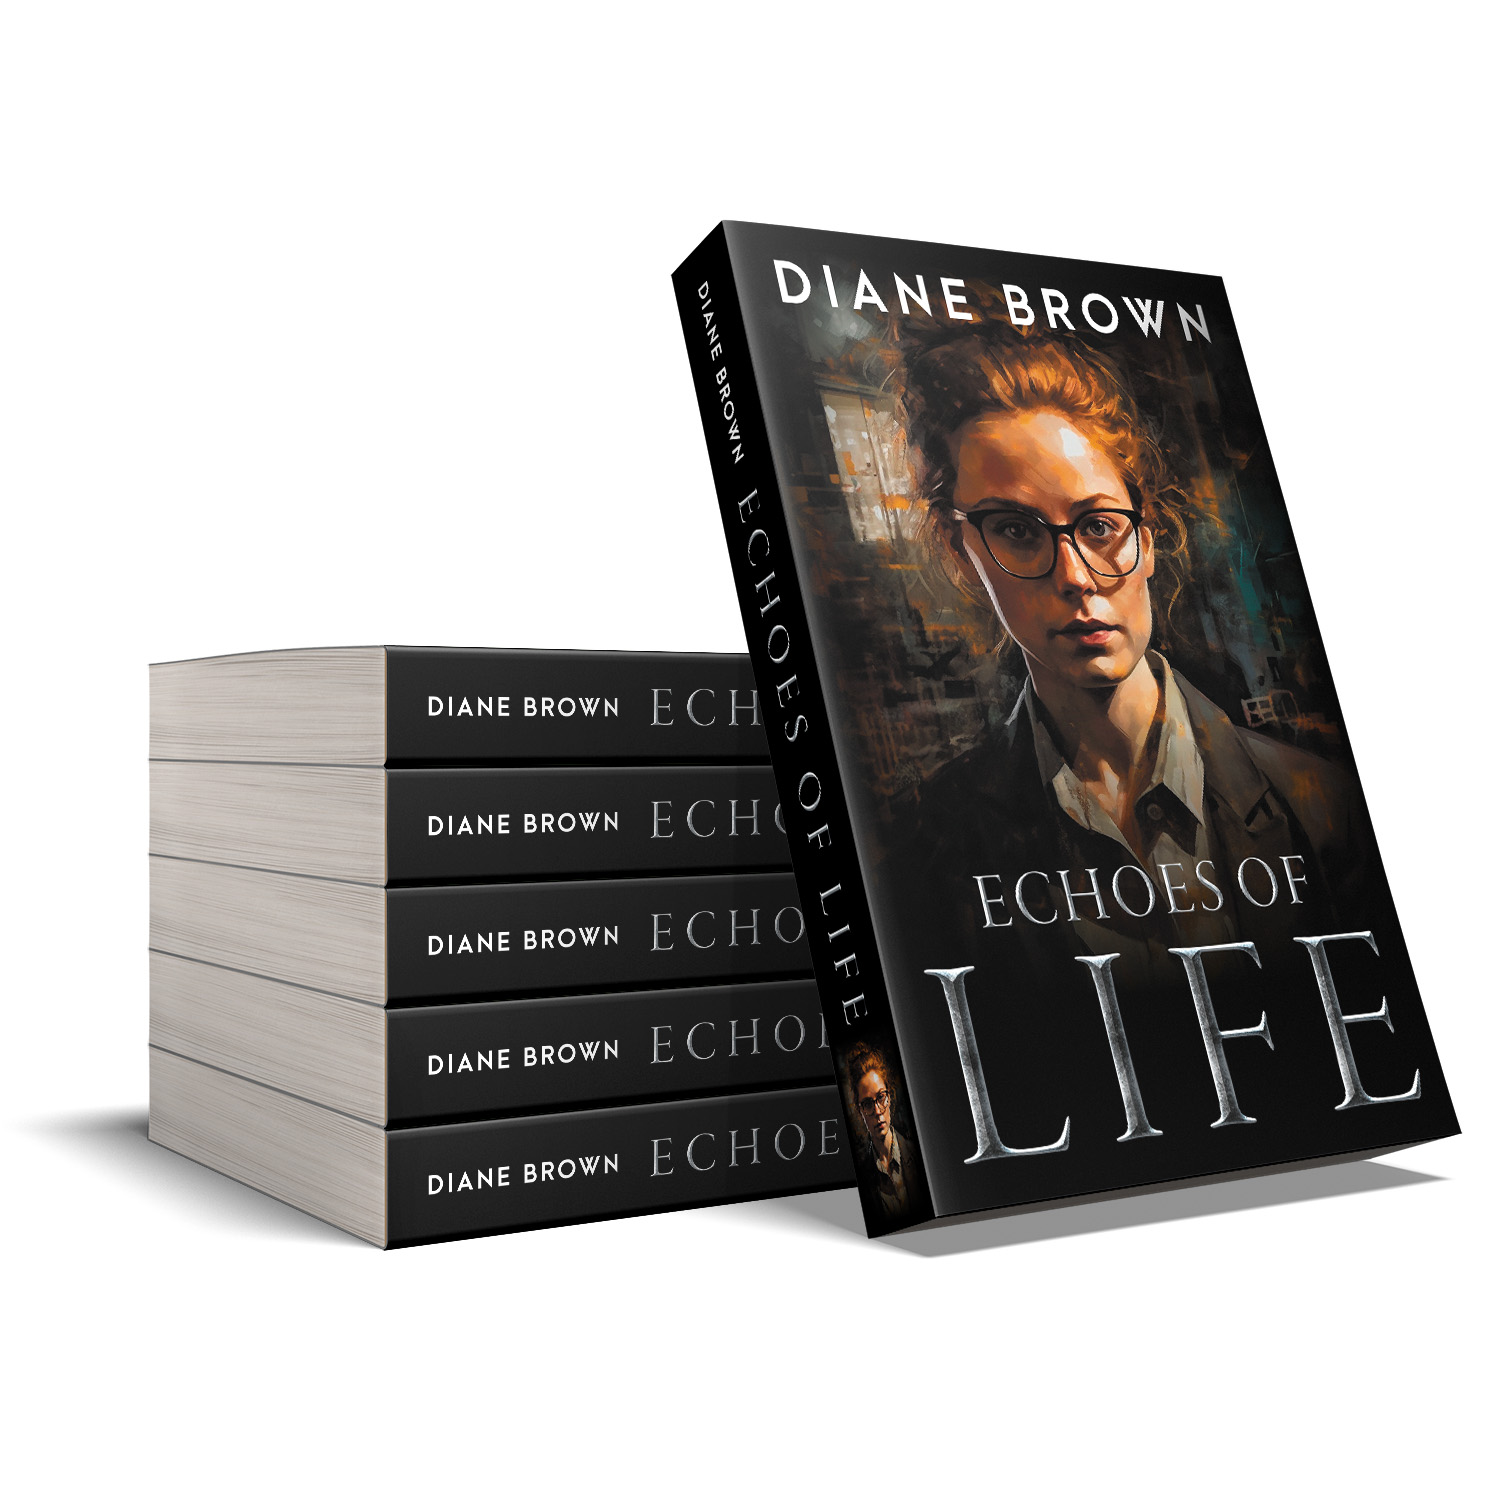 'Echoes of Life' is a deep and revealing character-based novel. The author is Diane Brown. The cover design and and interior formatting are by Mark Thomas of coverness.com. To find out more about my book design services, please visit www.coverness.com.